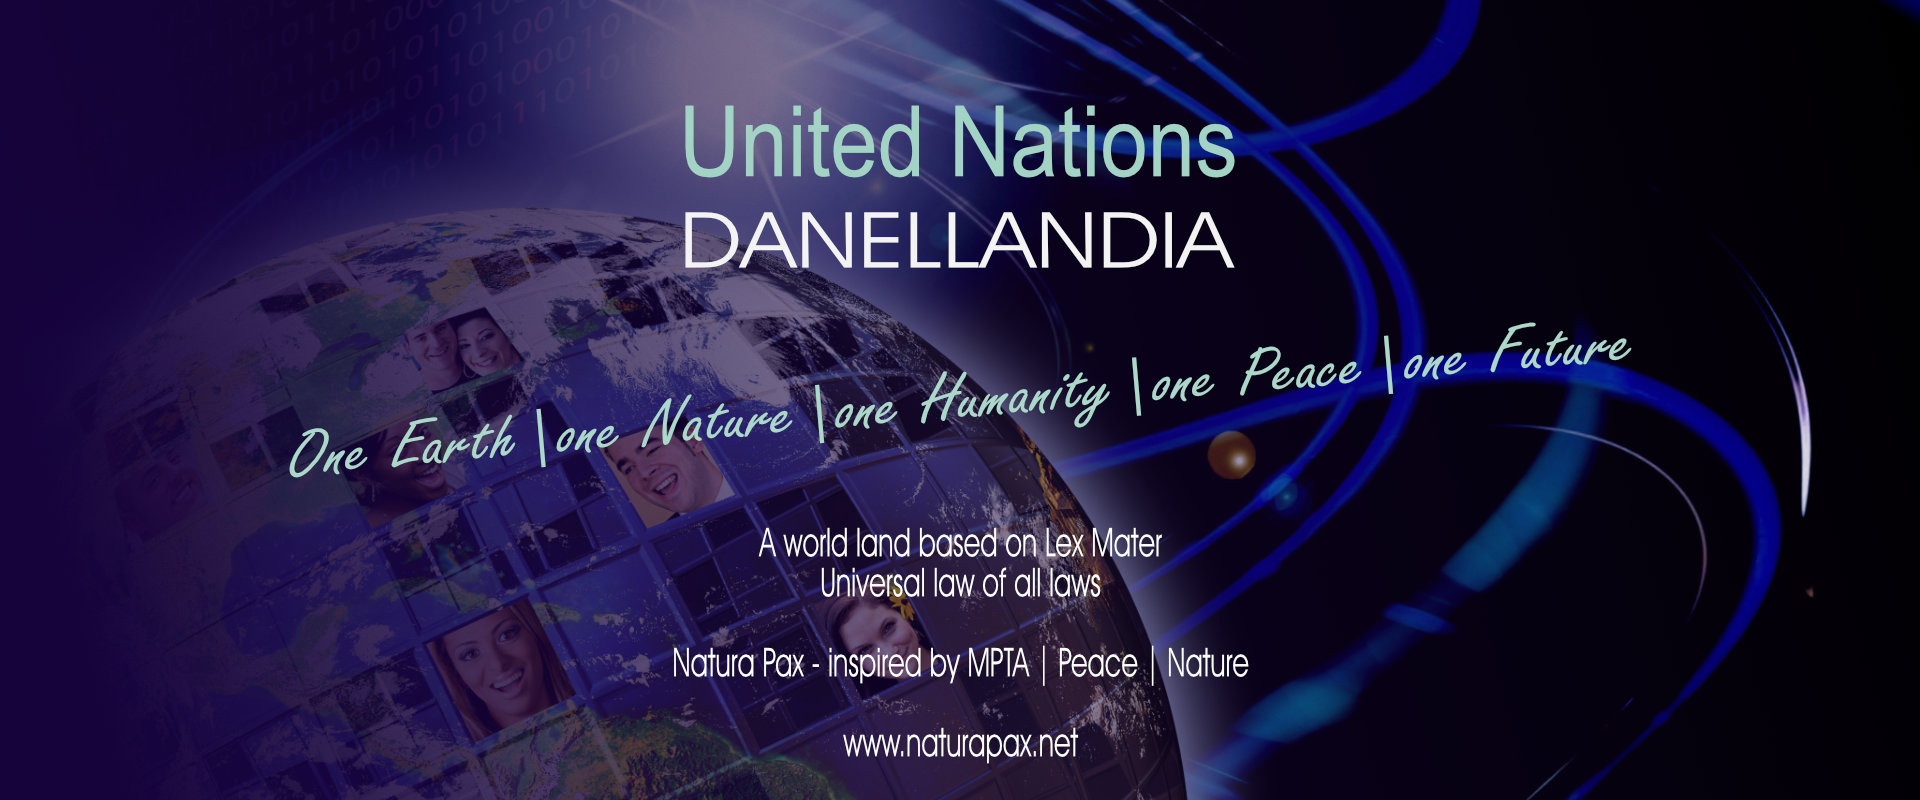 Call on United Nations